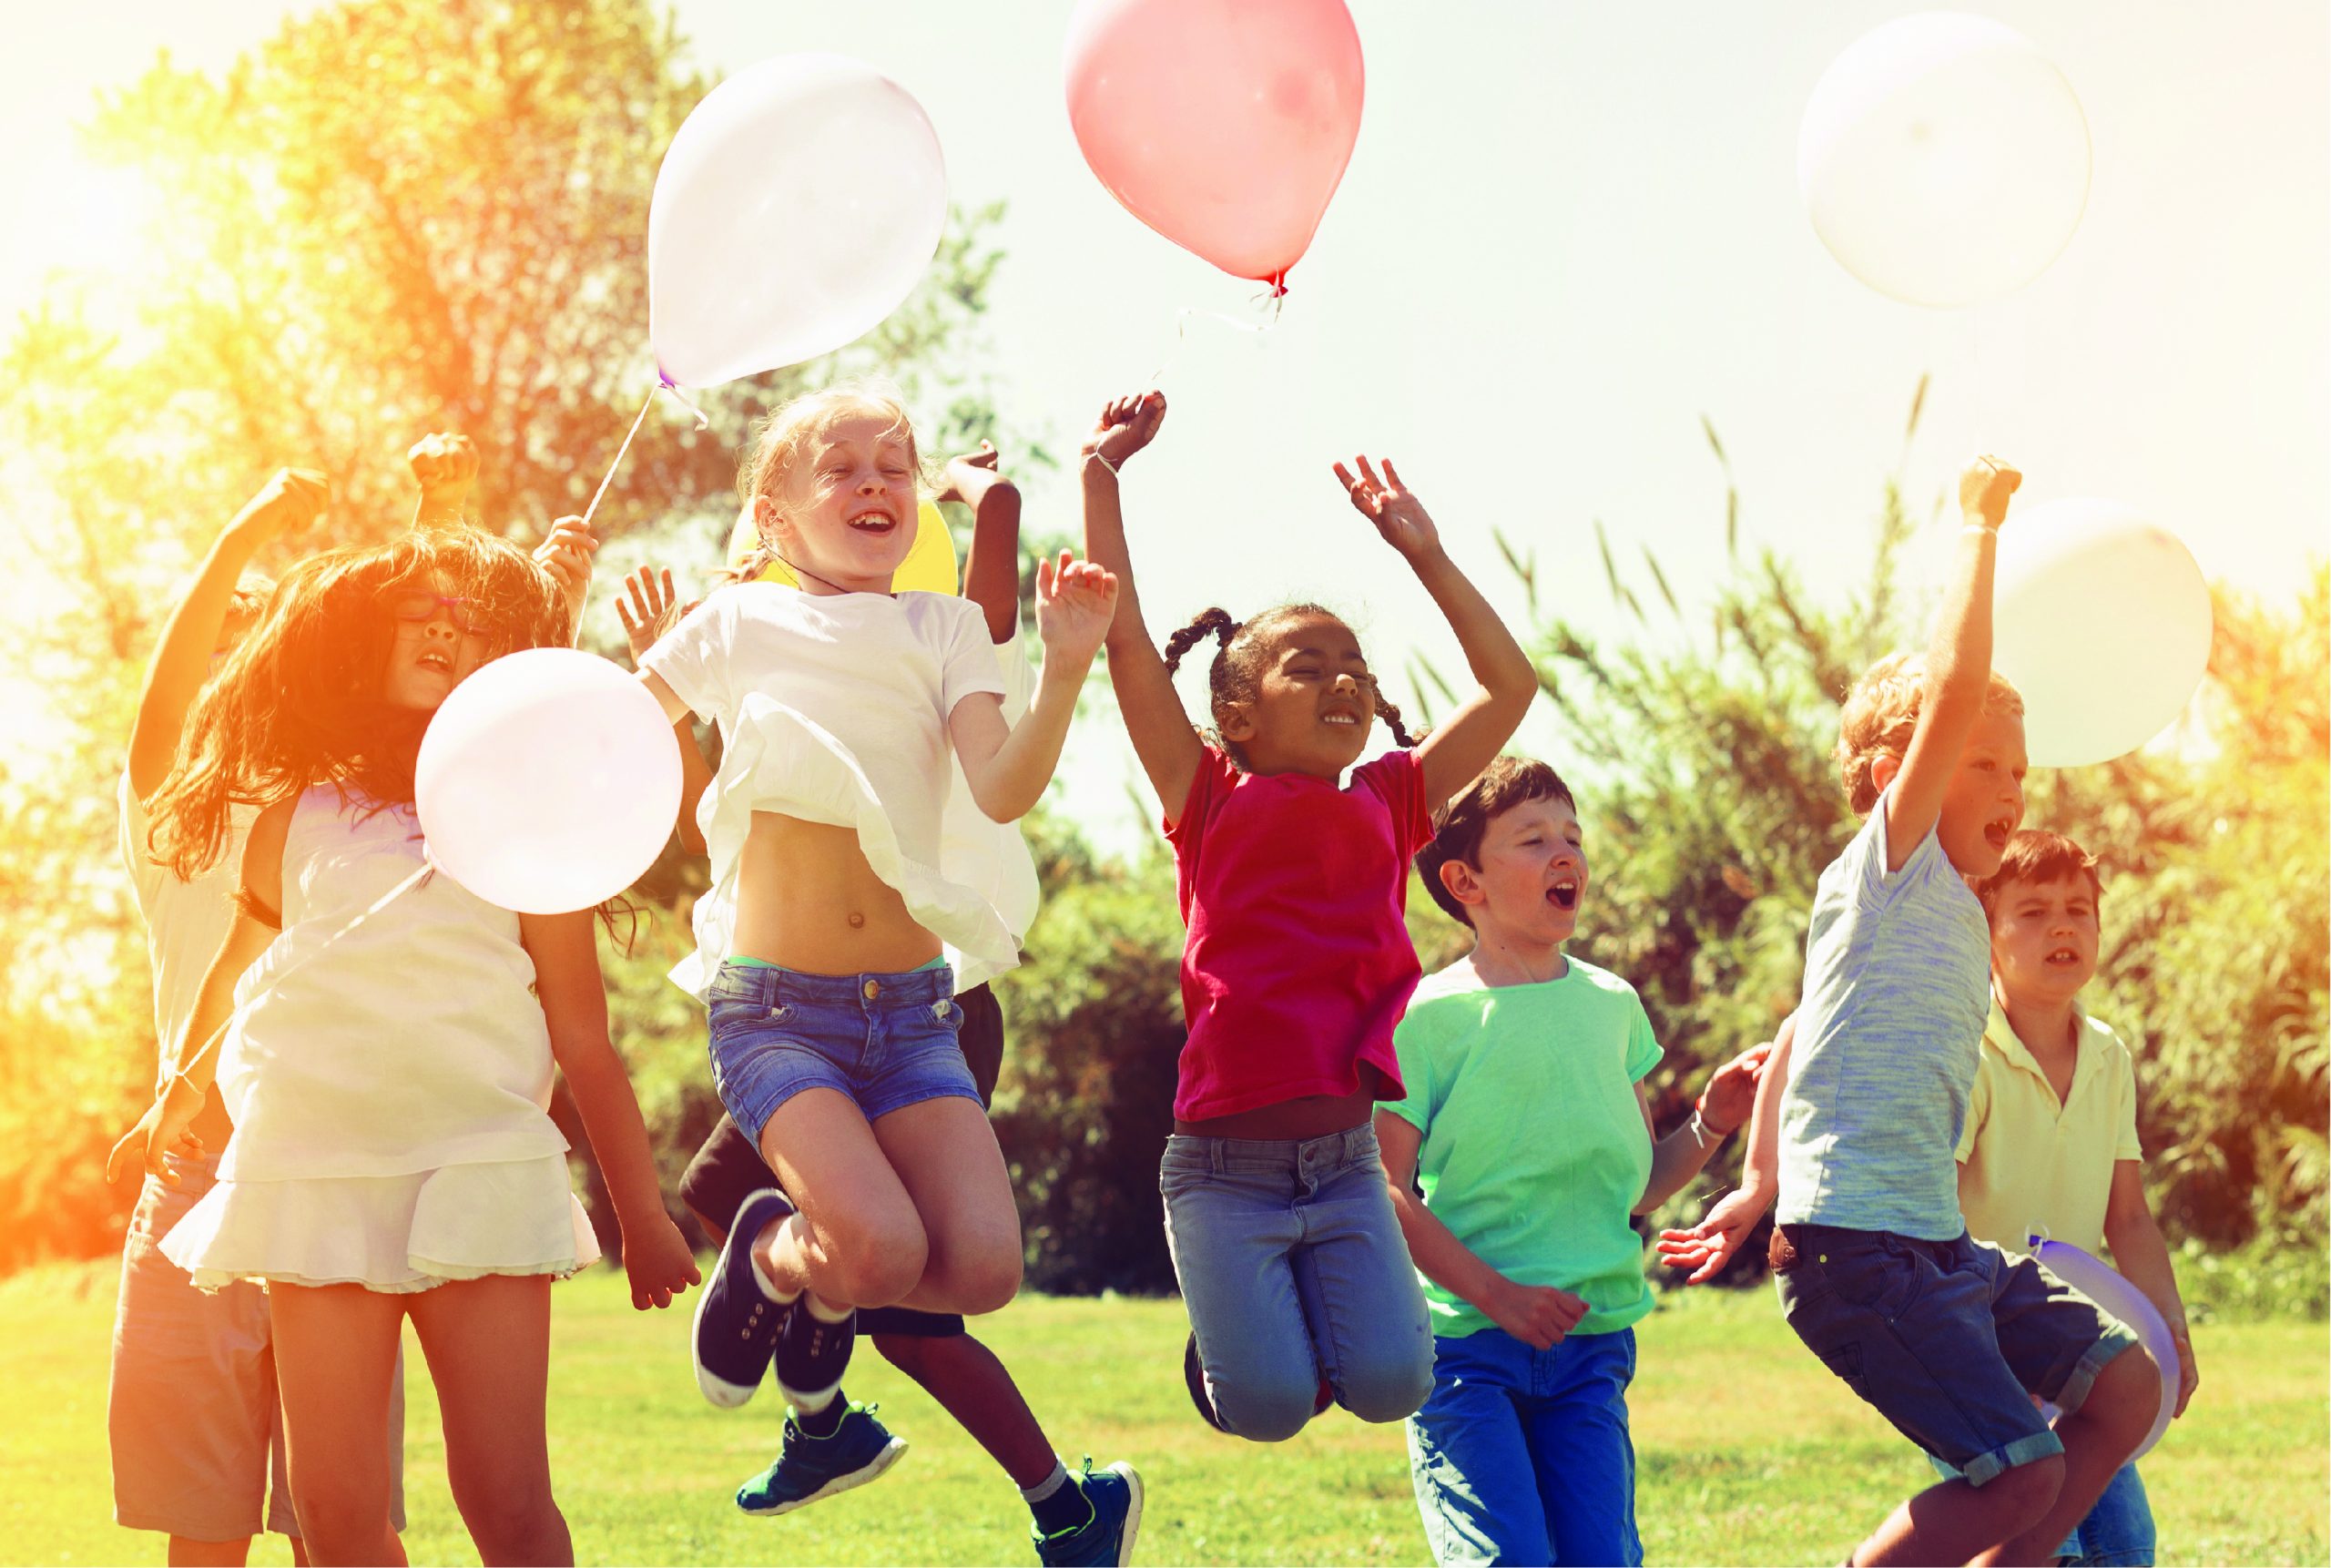 Happy playful children with balloons jumping around outdoors